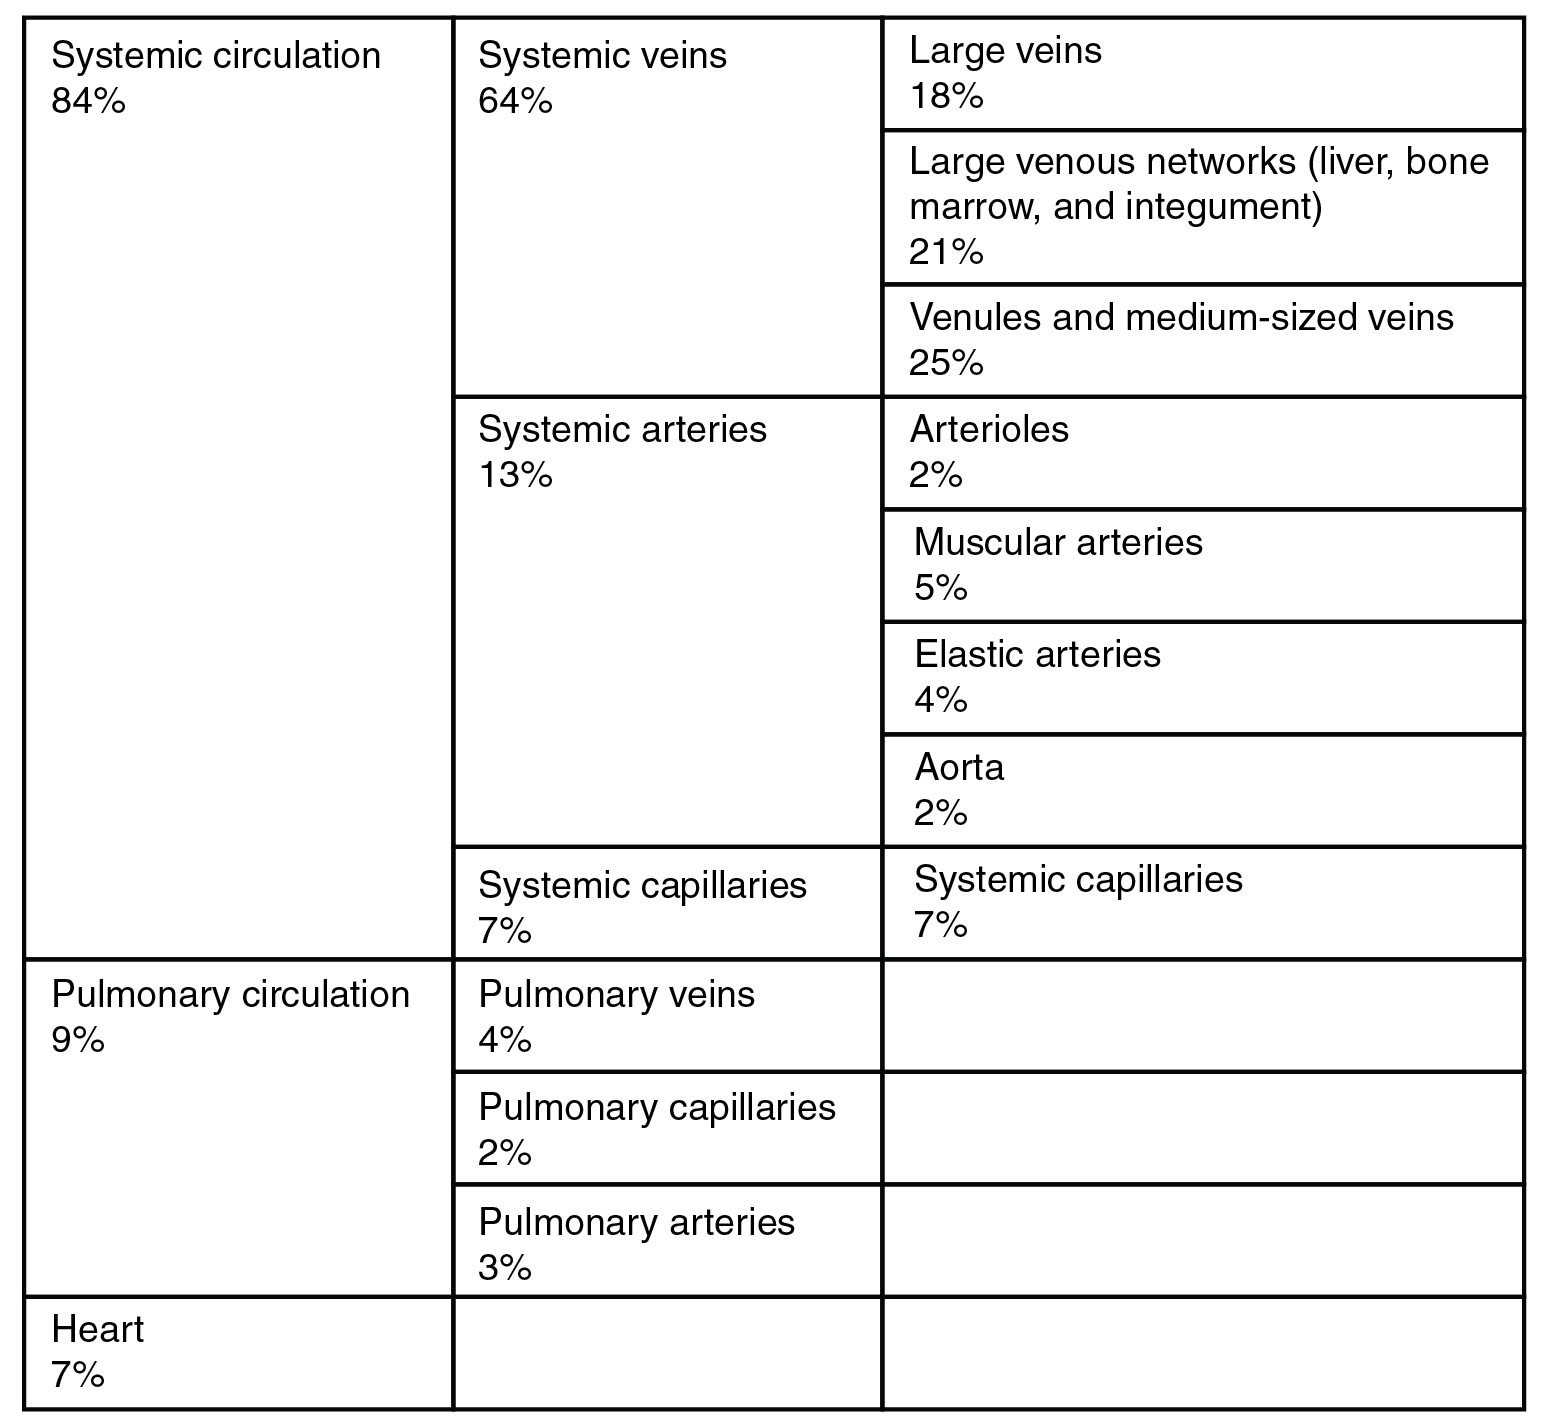 This table describes the distribution of blood flow. 84 percent of blood flow is systemic circulation, of which 64 percent happens in systemic veins (18 percent in large veins, 21 percent in large venous networks such as liver, bone marrow, and integument, and 25 percent in venules and medium-sized veins); 13 percent happens in systemic arteries (2 percent in arterioles, 5 percent in muscular arteries, 4 percent in elastic arteries, and 2 percent in the aorta); and 7 percent happens in systemic capillaries. 9 percent of blood flow is pulmonary circulation, of which 4 percent happens in pulmonary veins, 2 percent happens in pulmonary capillaries, and 3 percent happens in pulmonary arteries. The remaining 7 percent of blood flow is in the heart.